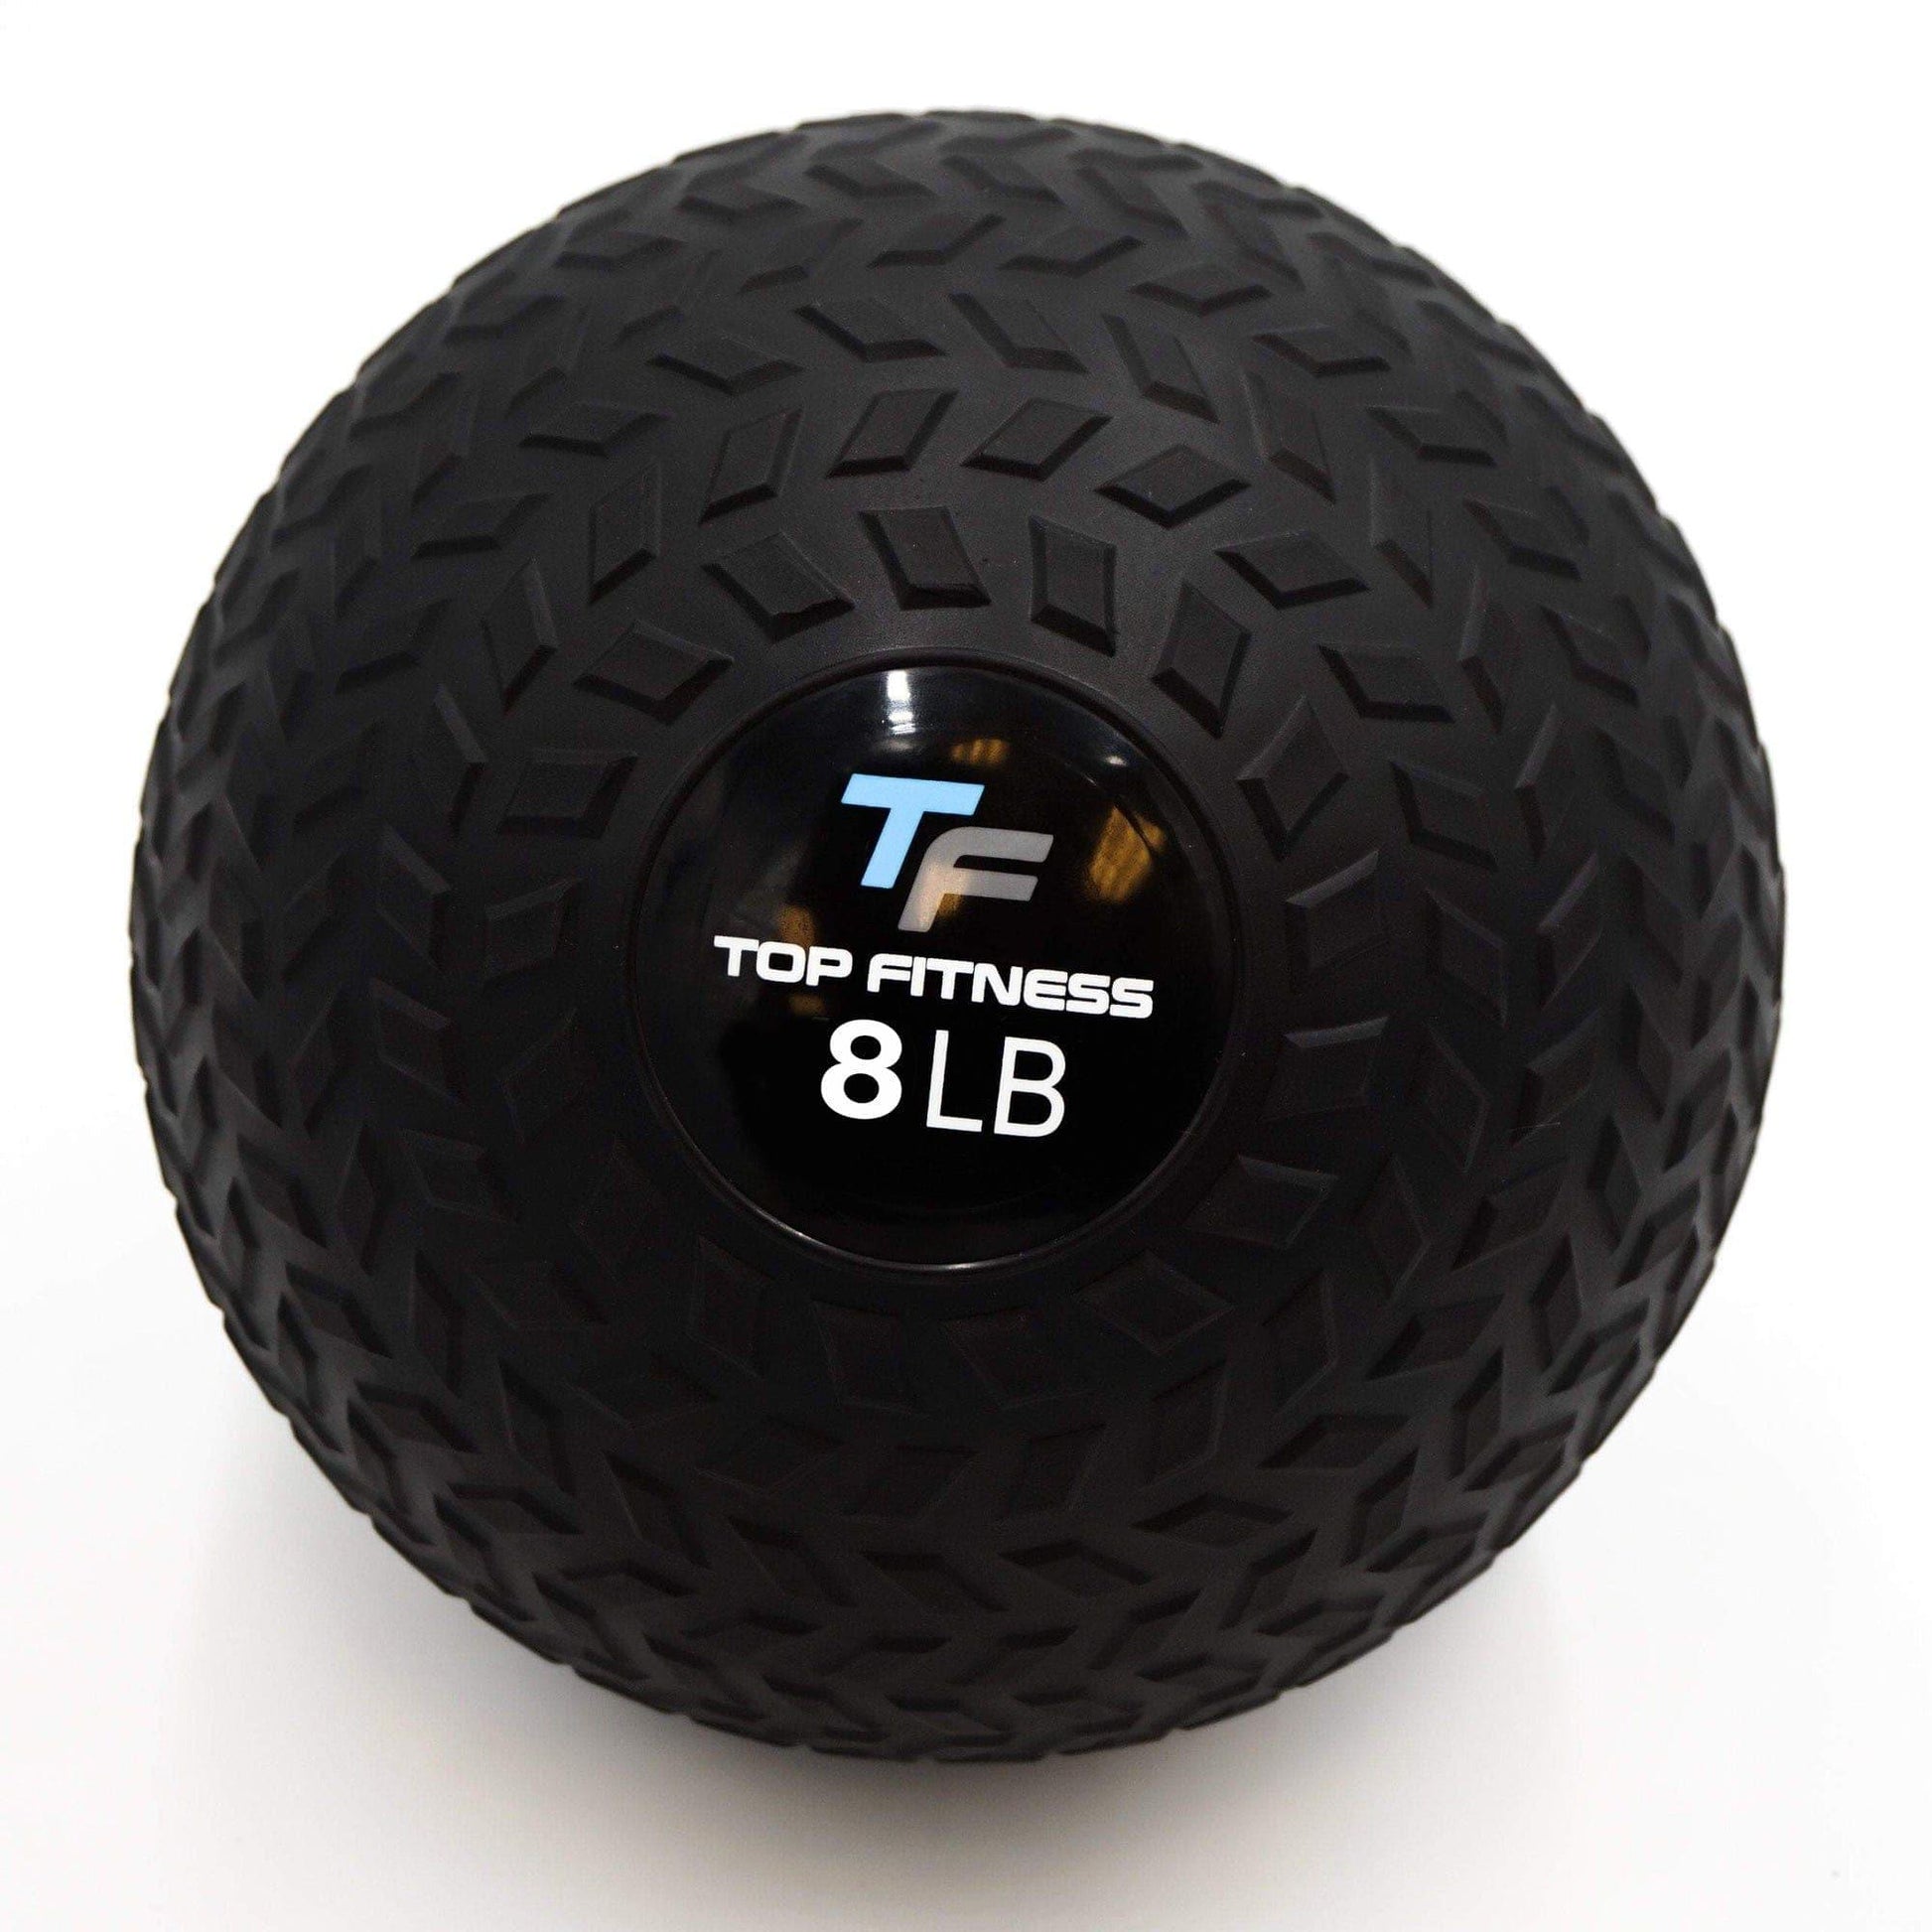 Top Fitness Slam Ball Weighted Resistance Top Fitness 8lb